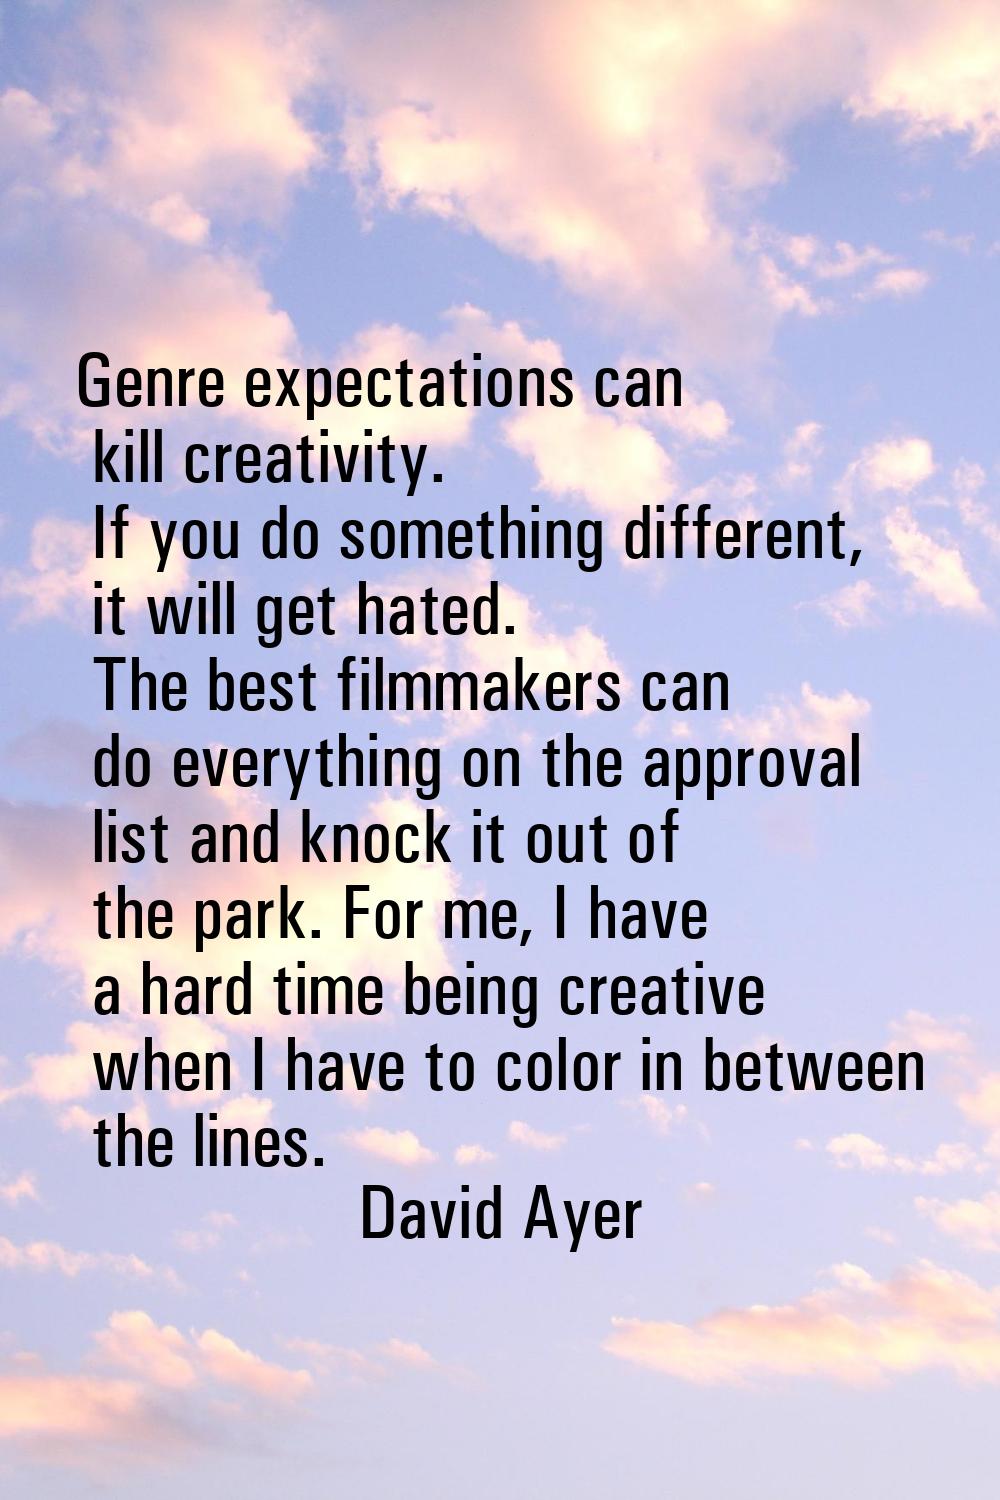 Genre expectations can kill creativity. If you do something different, it will get hated. The best 